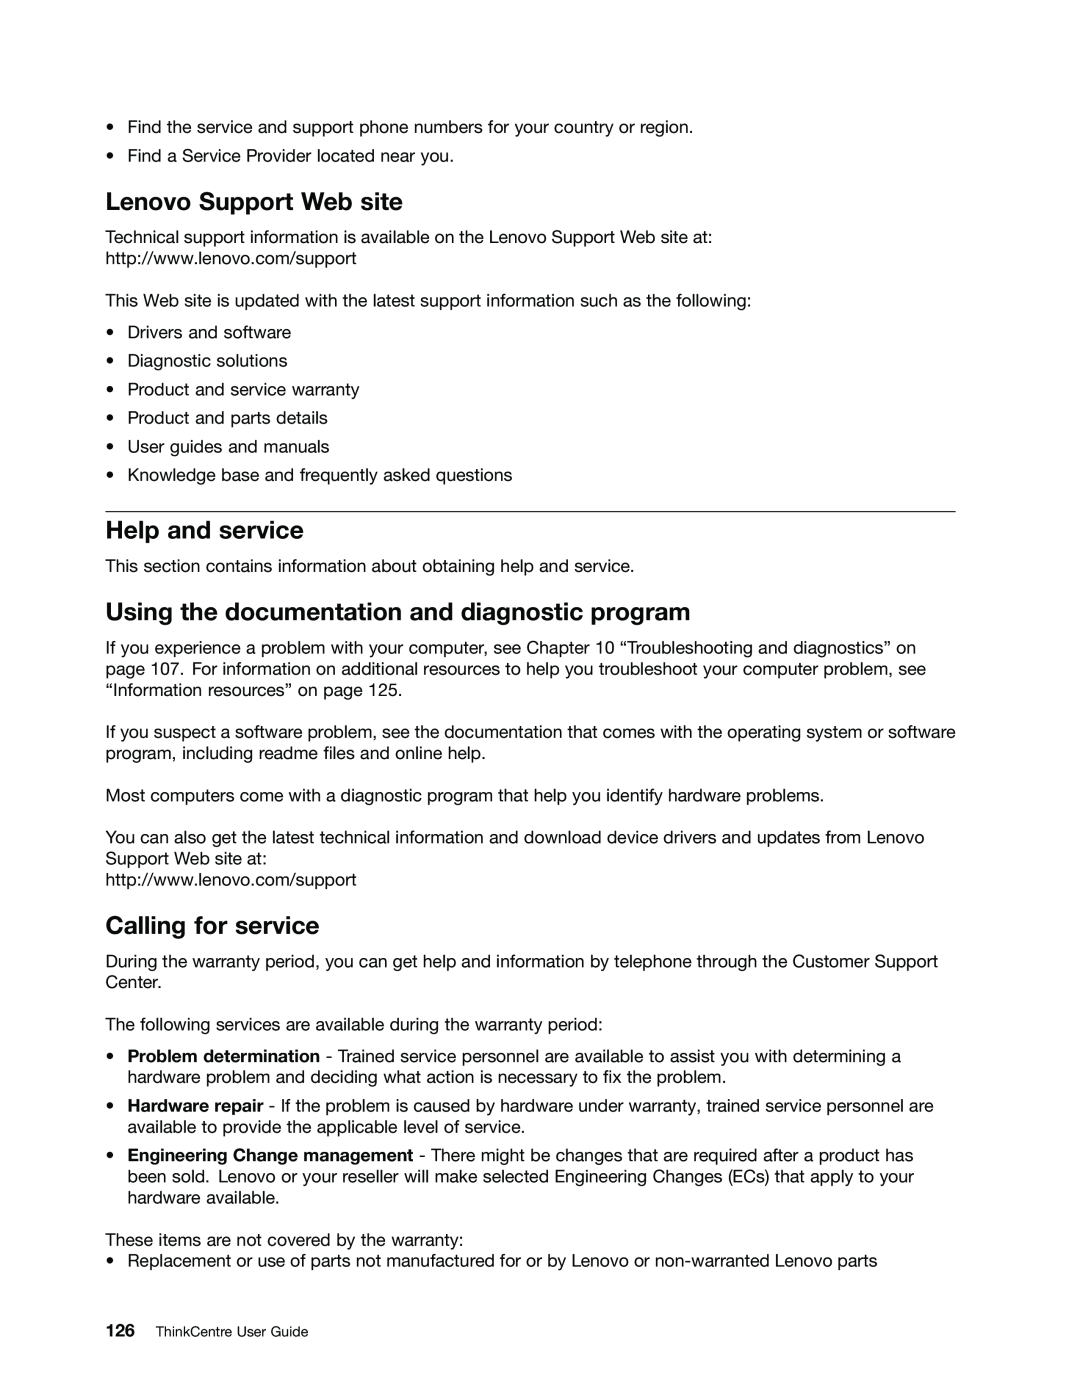 Lenovo 2800 Lenovo Support Web site, Help and service, Using the documentation and diagnostic program, Calling for service 